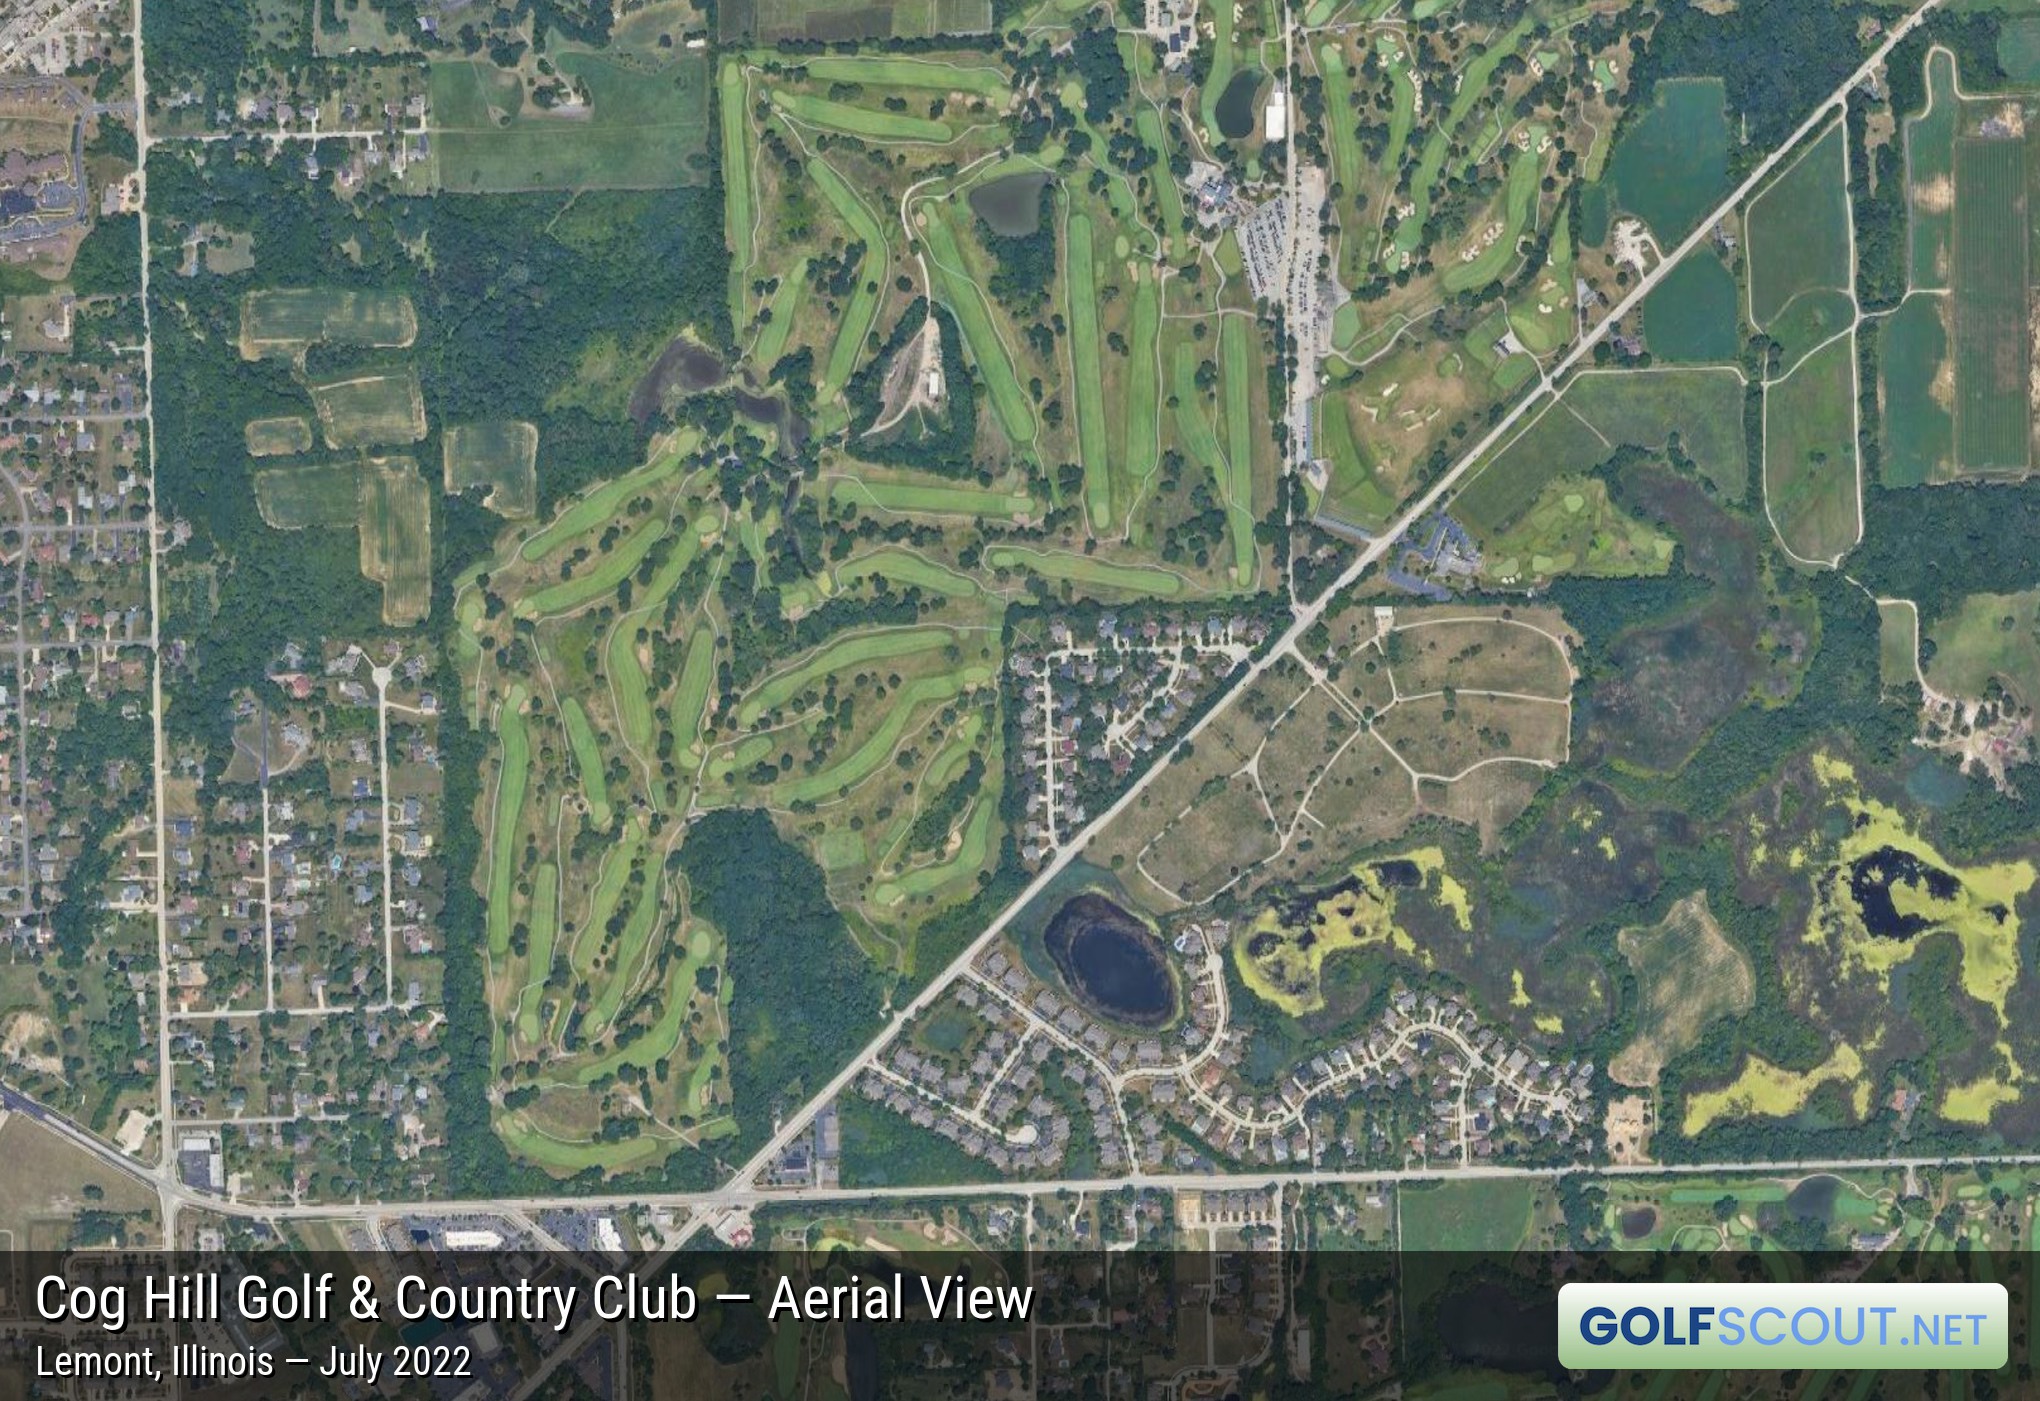 Aerial satellite imagery of Cog Hill Course #1 in Palos Park, Illinois. This image is zoomed in on the southwest area of Cog Hill where Courses 1 and 3 are located. Image courtesy of Google Maps.